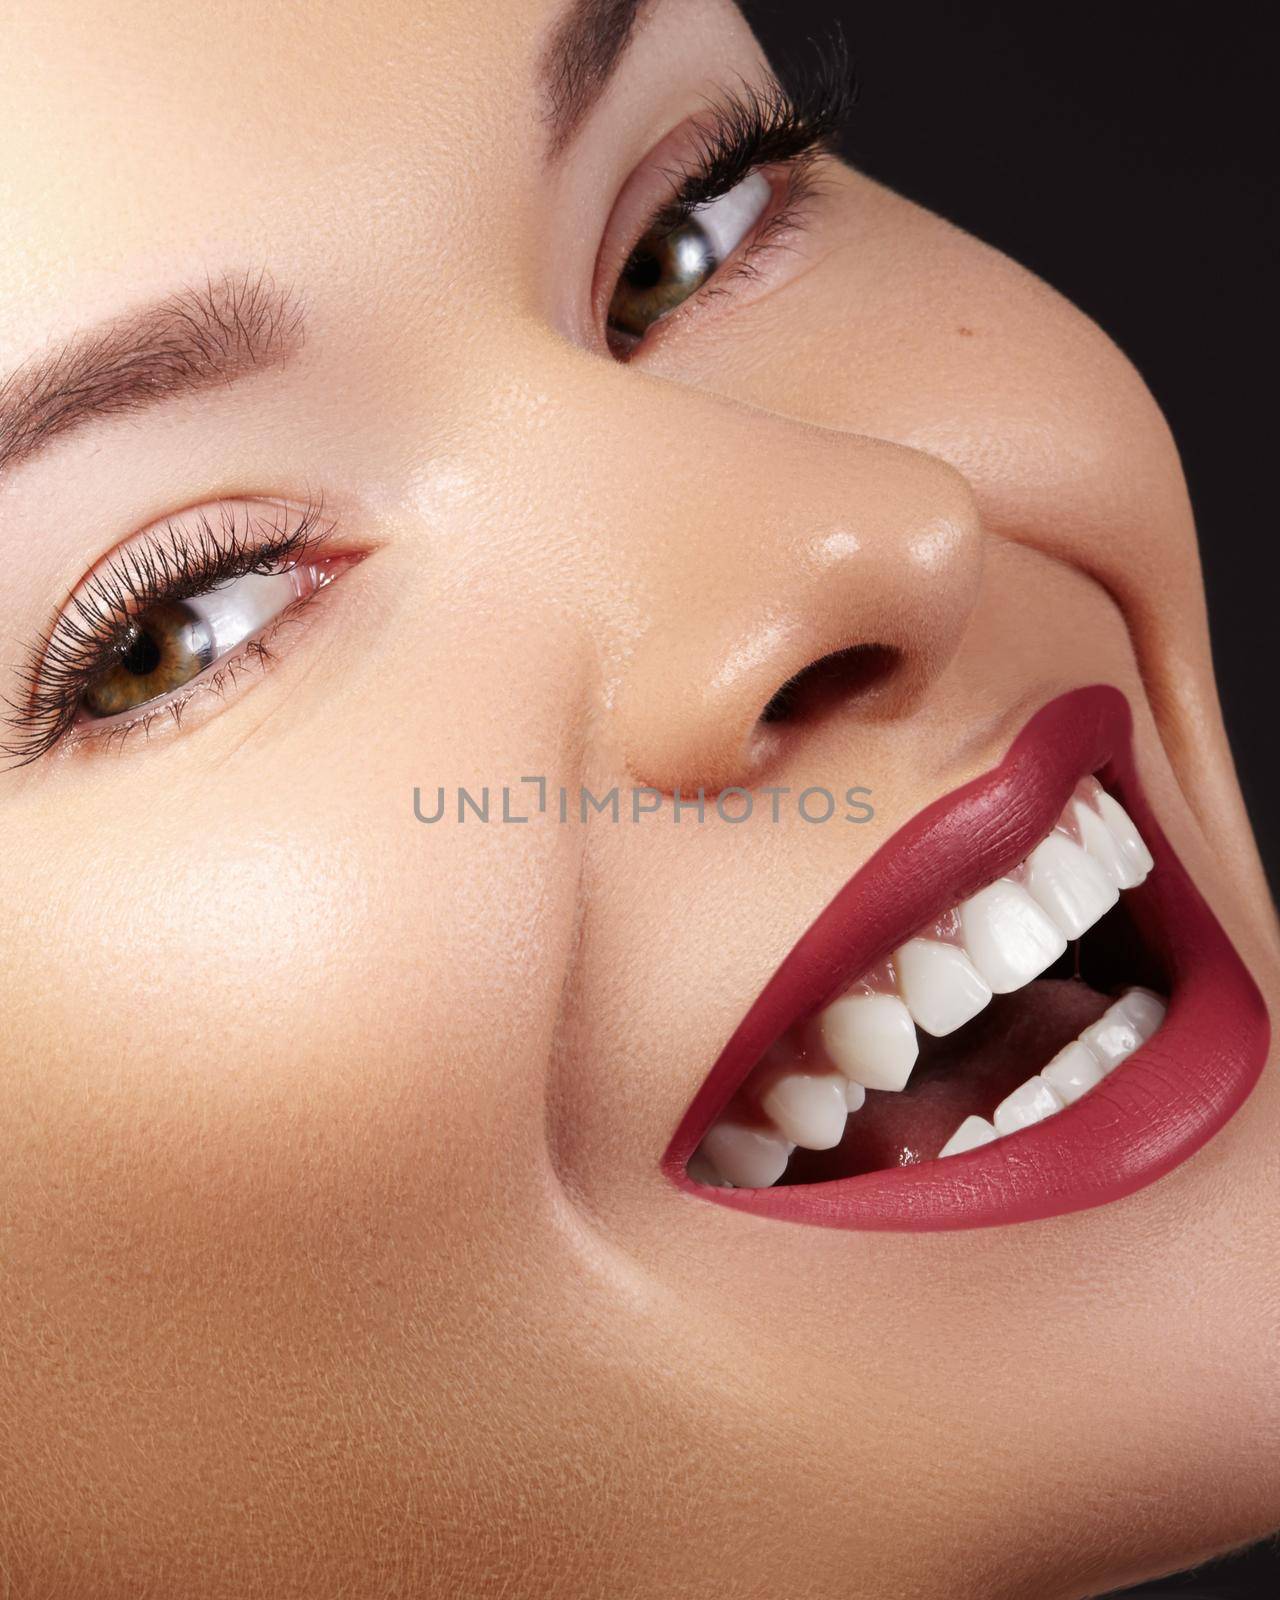 Fashion Woman Face With Perfect Smile. Close-up Of Beautiful Girl Face With Bright Make-up. Female Model With Smooth Skin, Extra Long Eyelashes, Red Lips and Healthy White Teeth